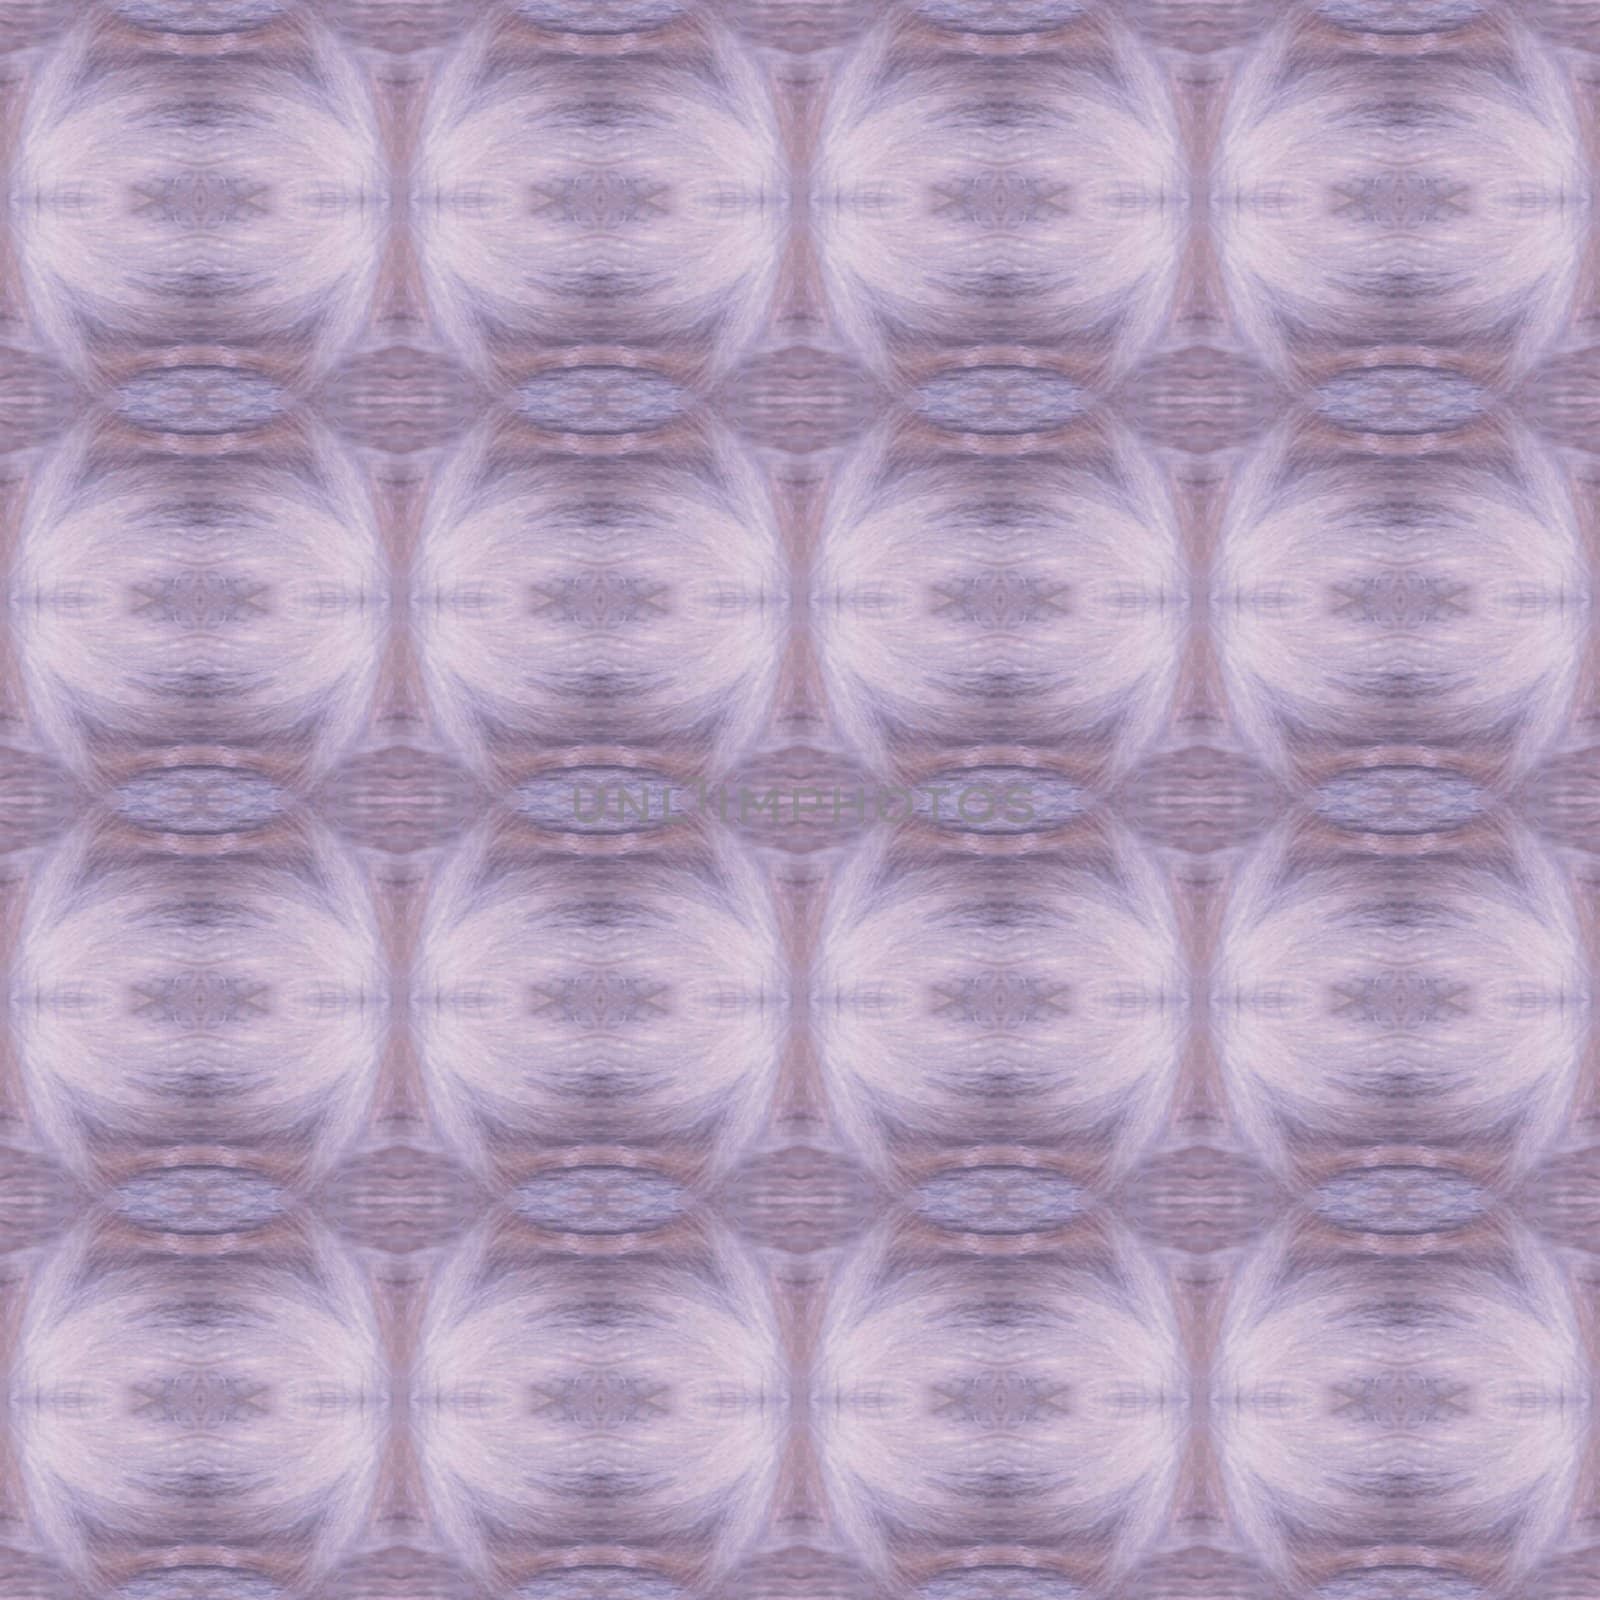 Lilac seamless tileable background or border. Fur tiles retro texture with an old-fashioned twist